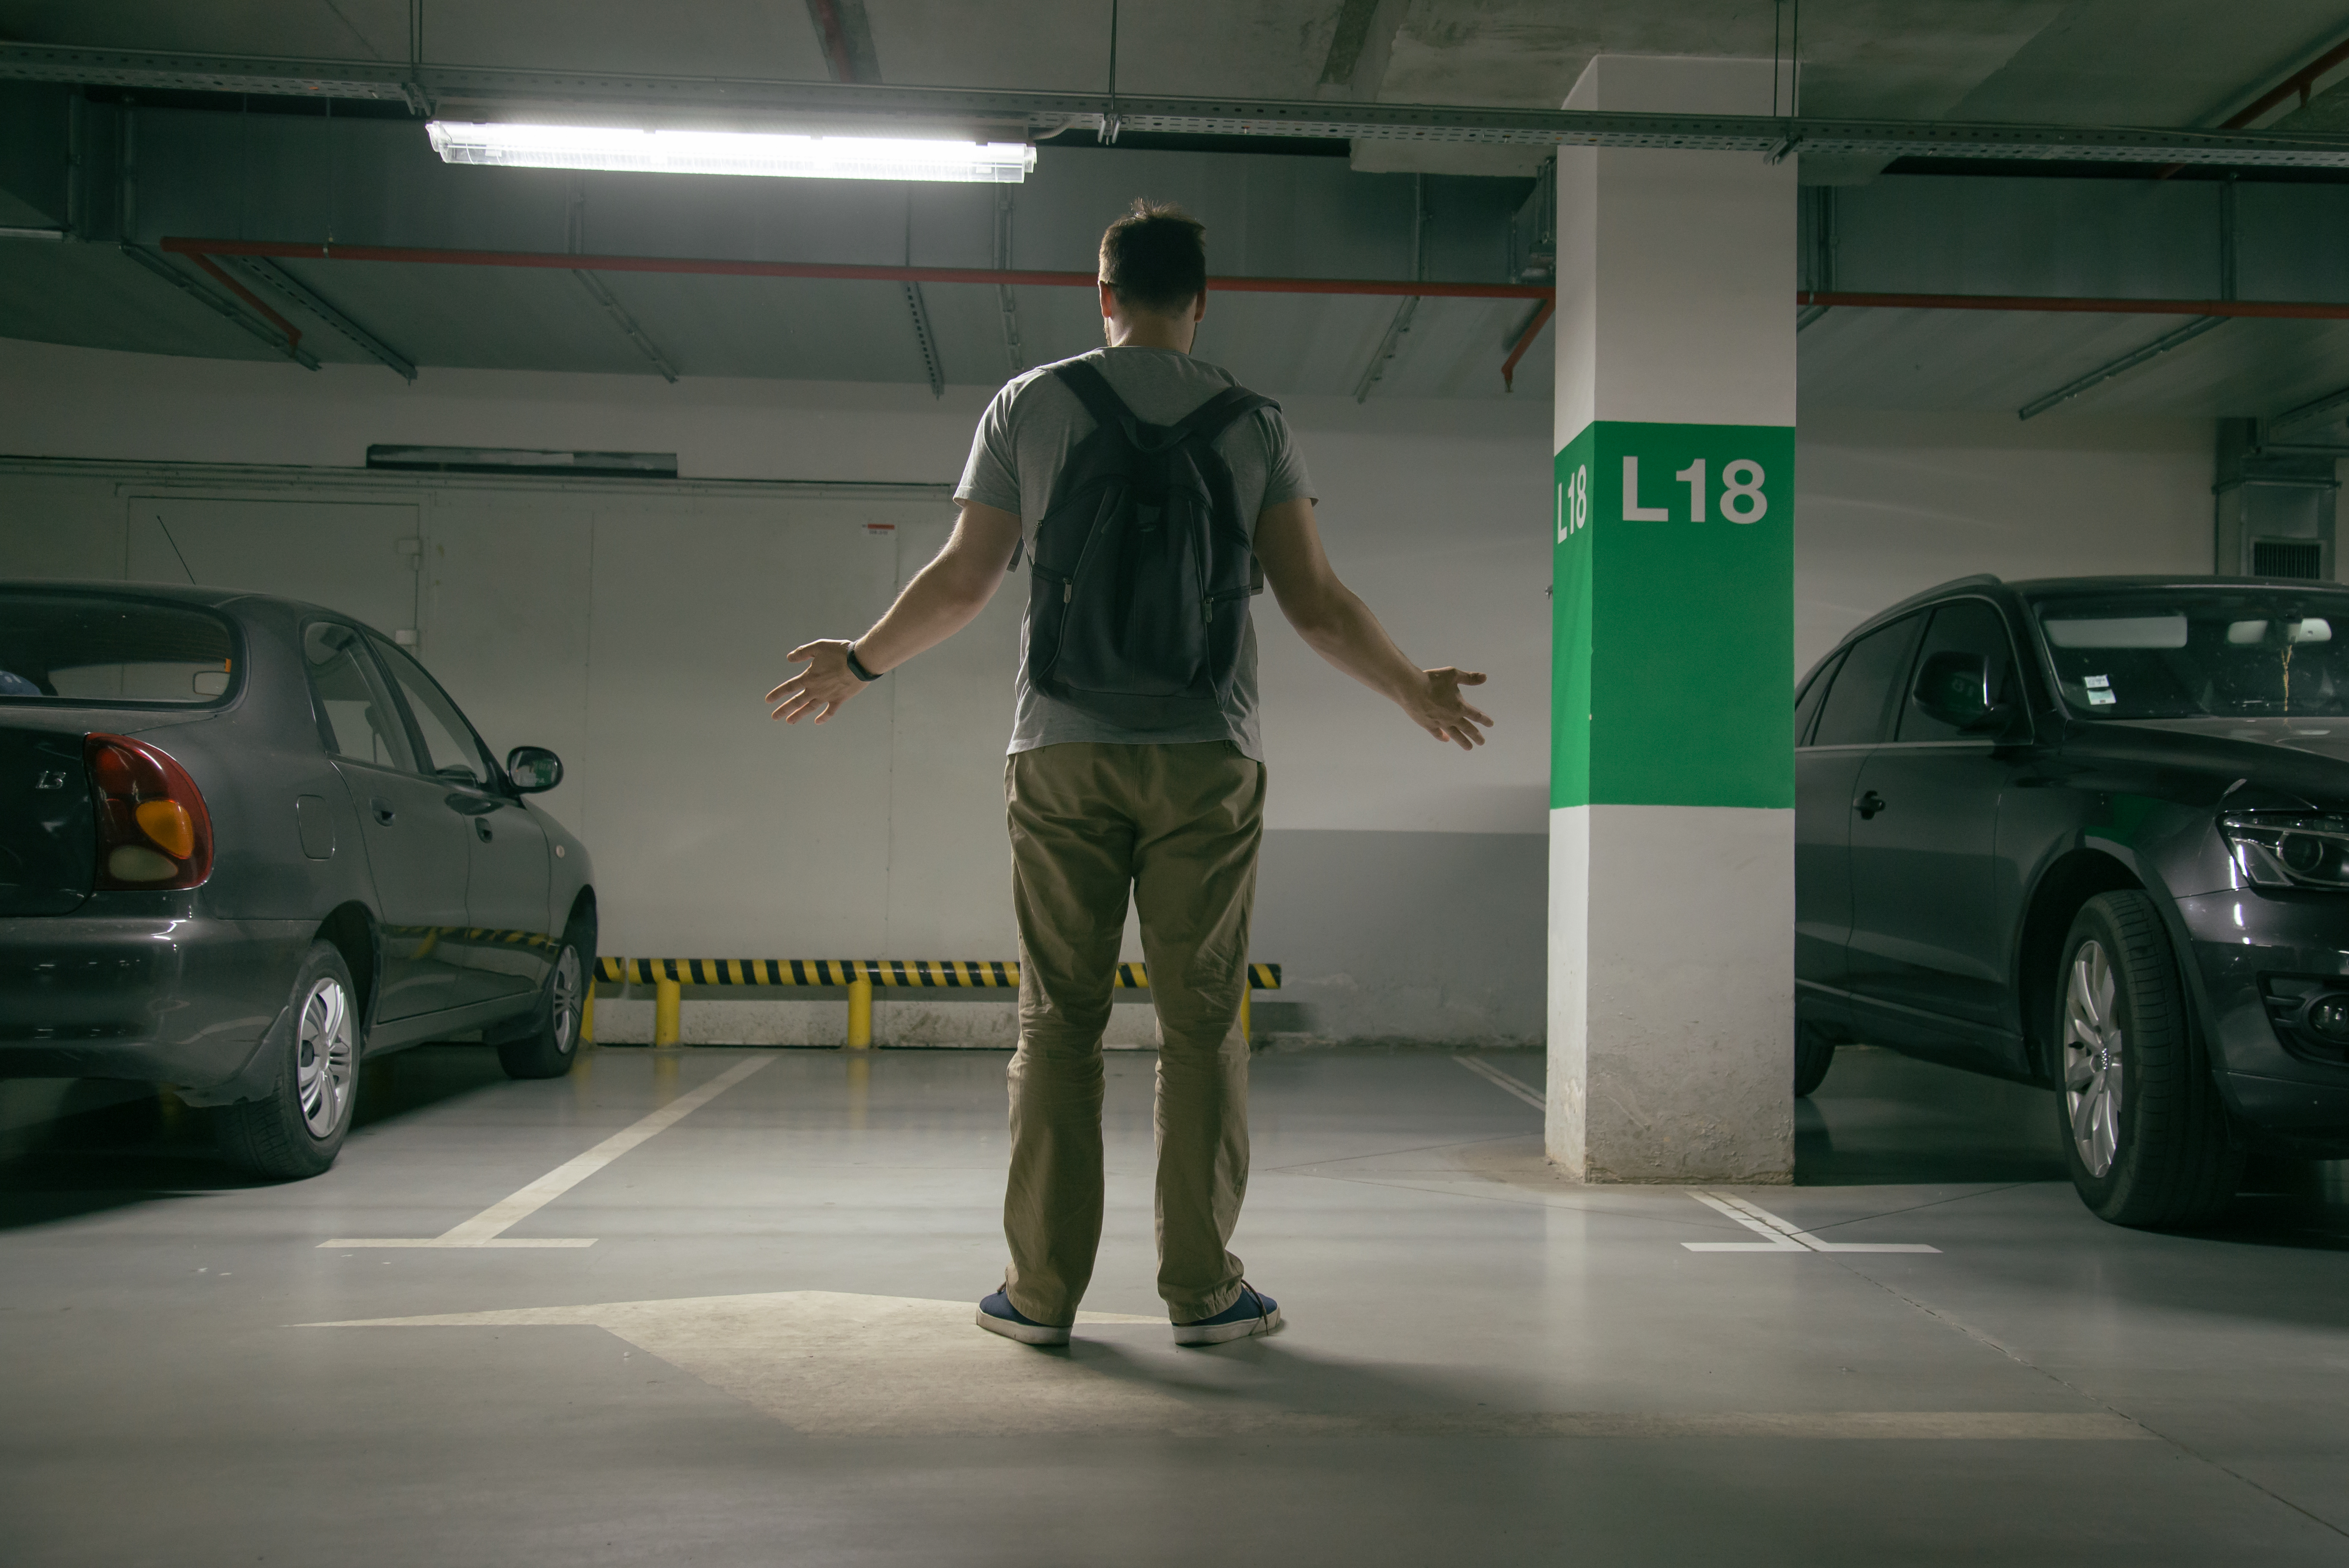 Fleet car owner standing in front of an empty parking space.